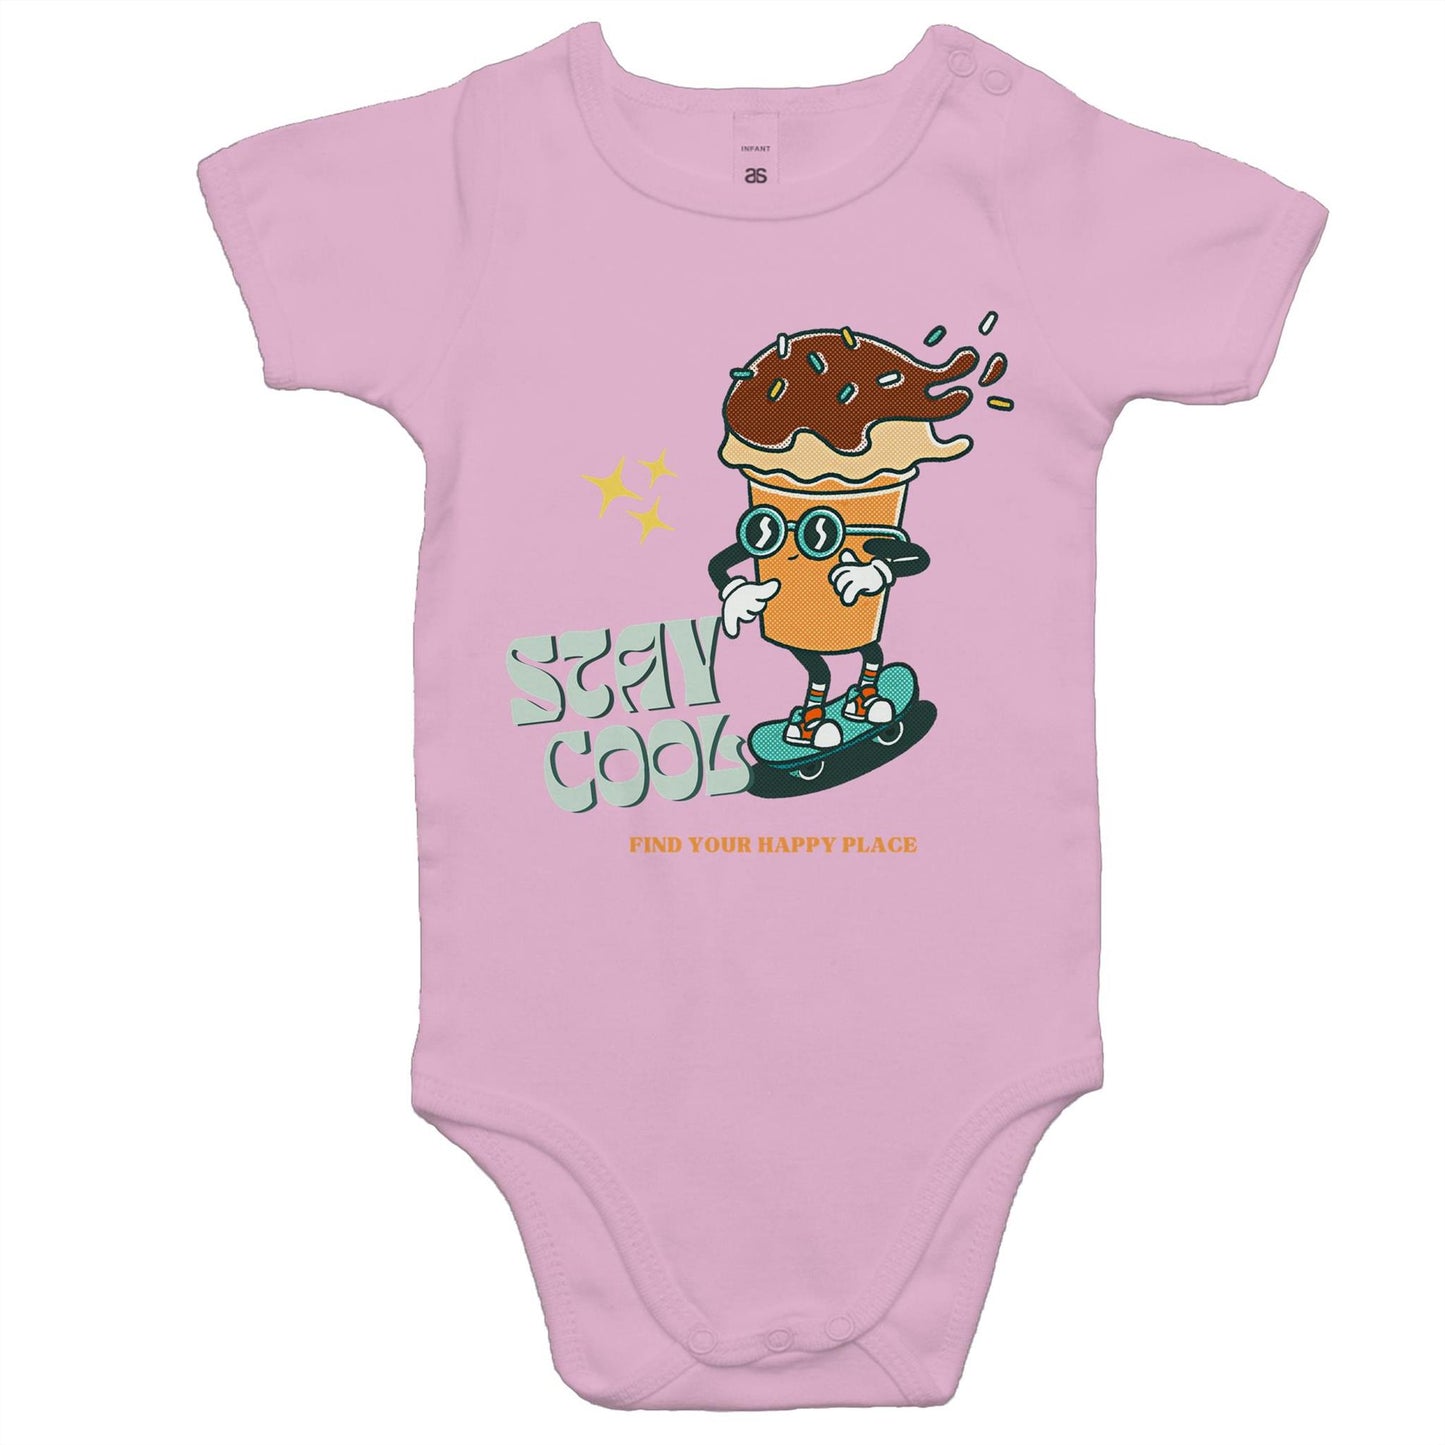 Stay Cool, Find Your Happy Place - Baby Bodysuit Pink Baby Bodysuit Retro Summer